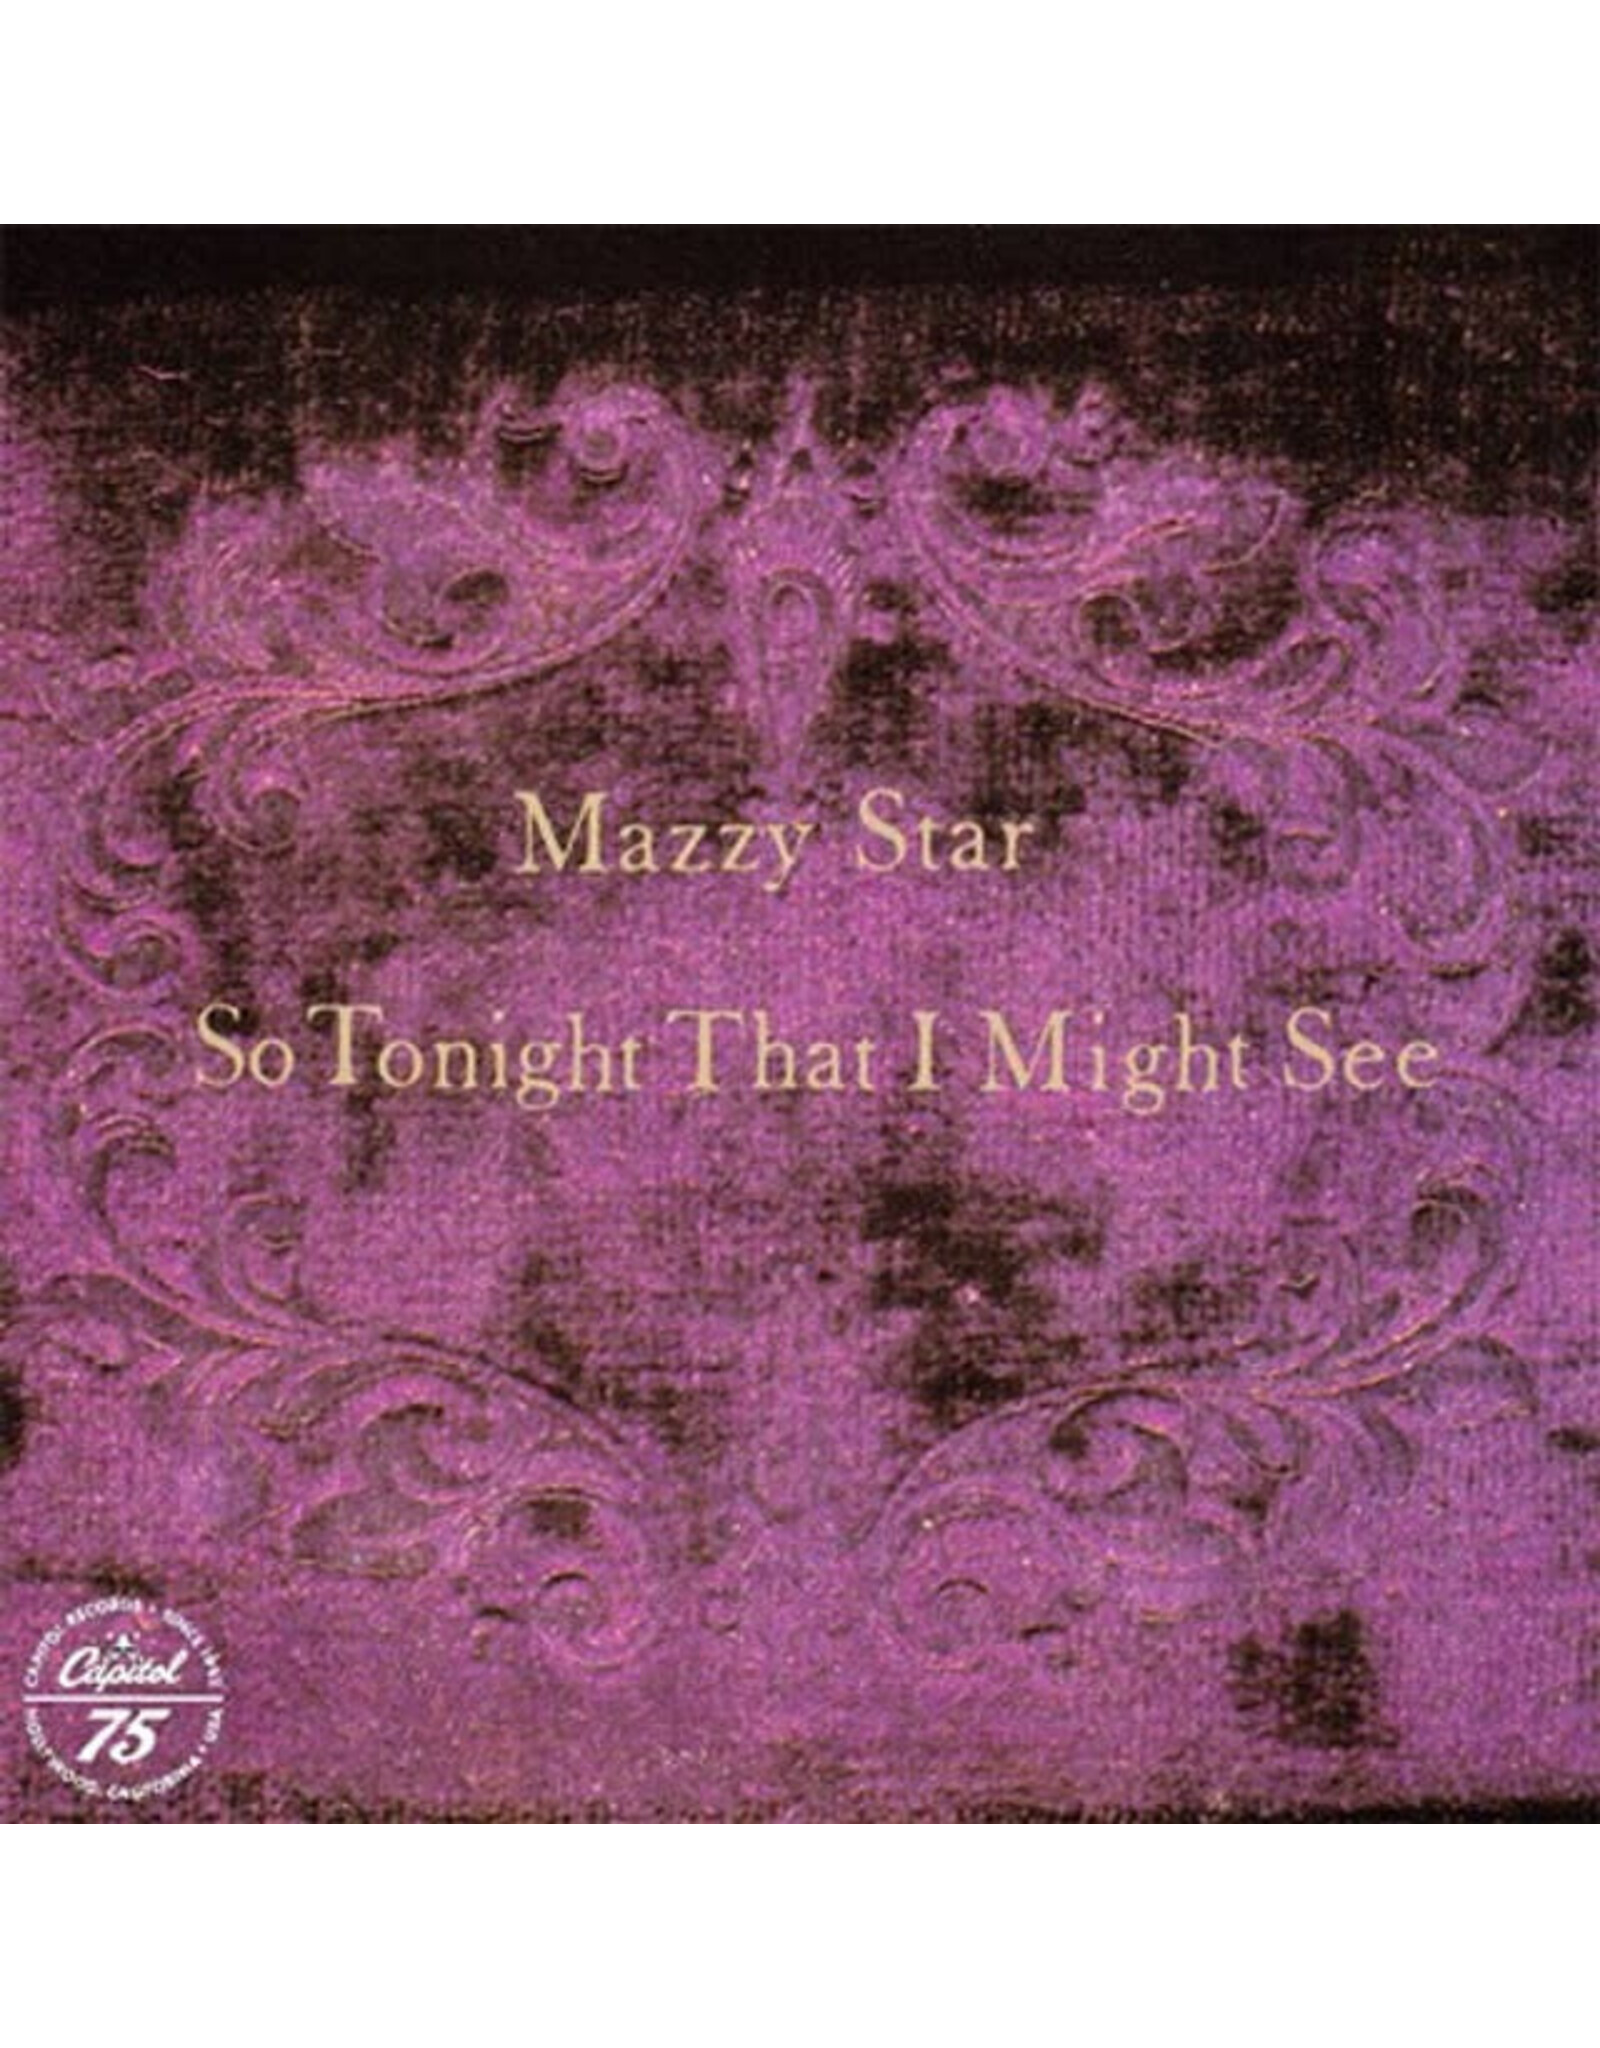 Capitol Mazzy Star: So Tonight That I Might See LP